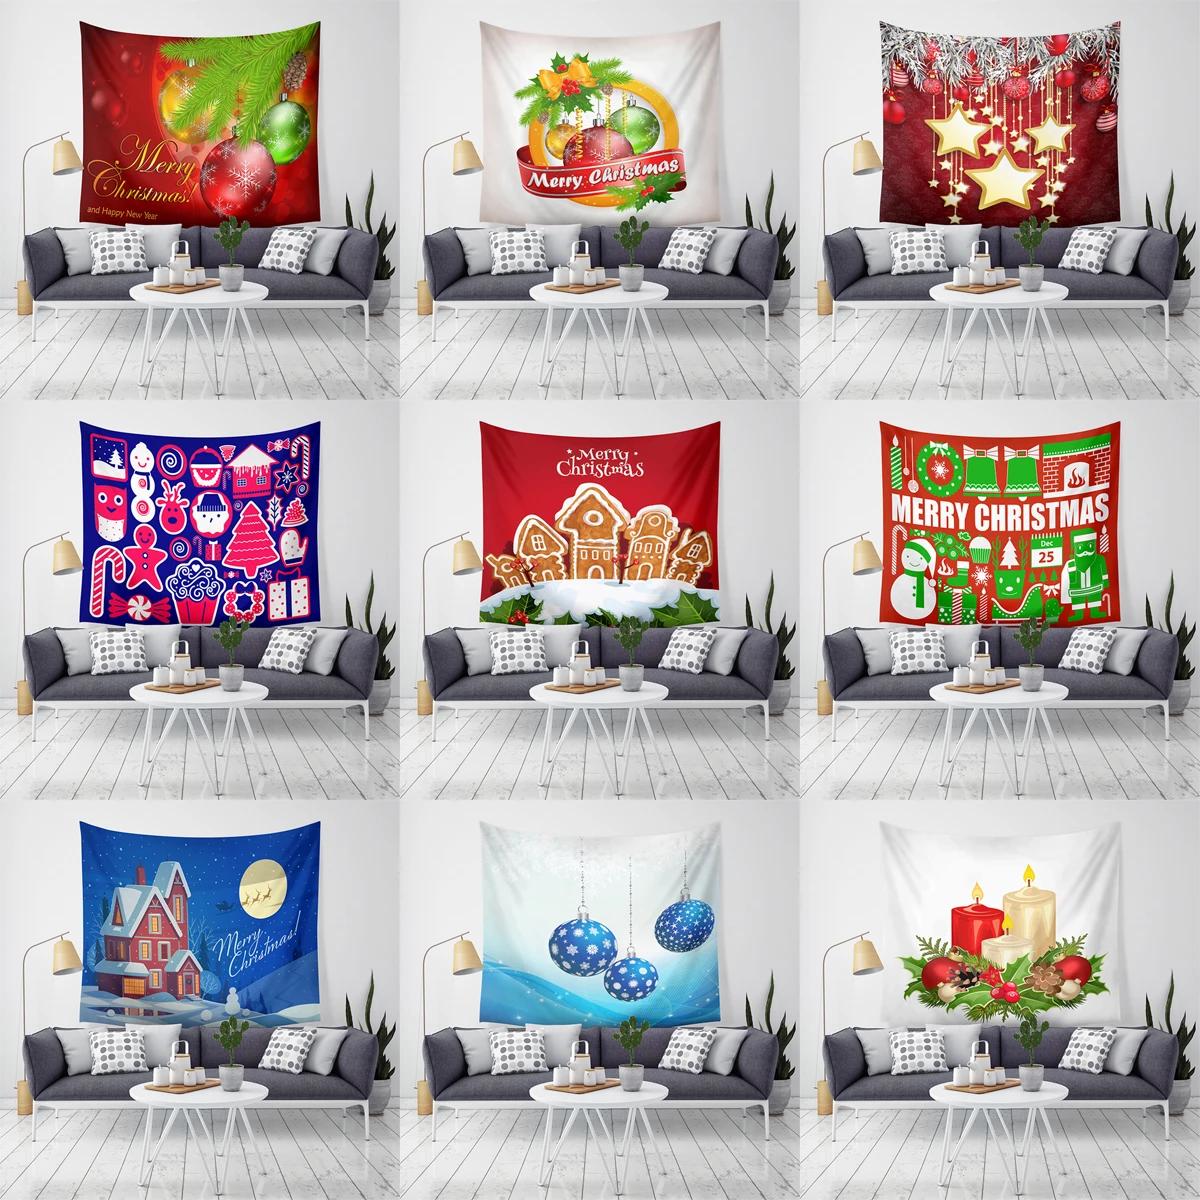 

ZHENHE Christmas Colorful Decorative Ball Tapestry Home Decor Wall Hanging Tapestries Bedspread Yoga Mat Blanket